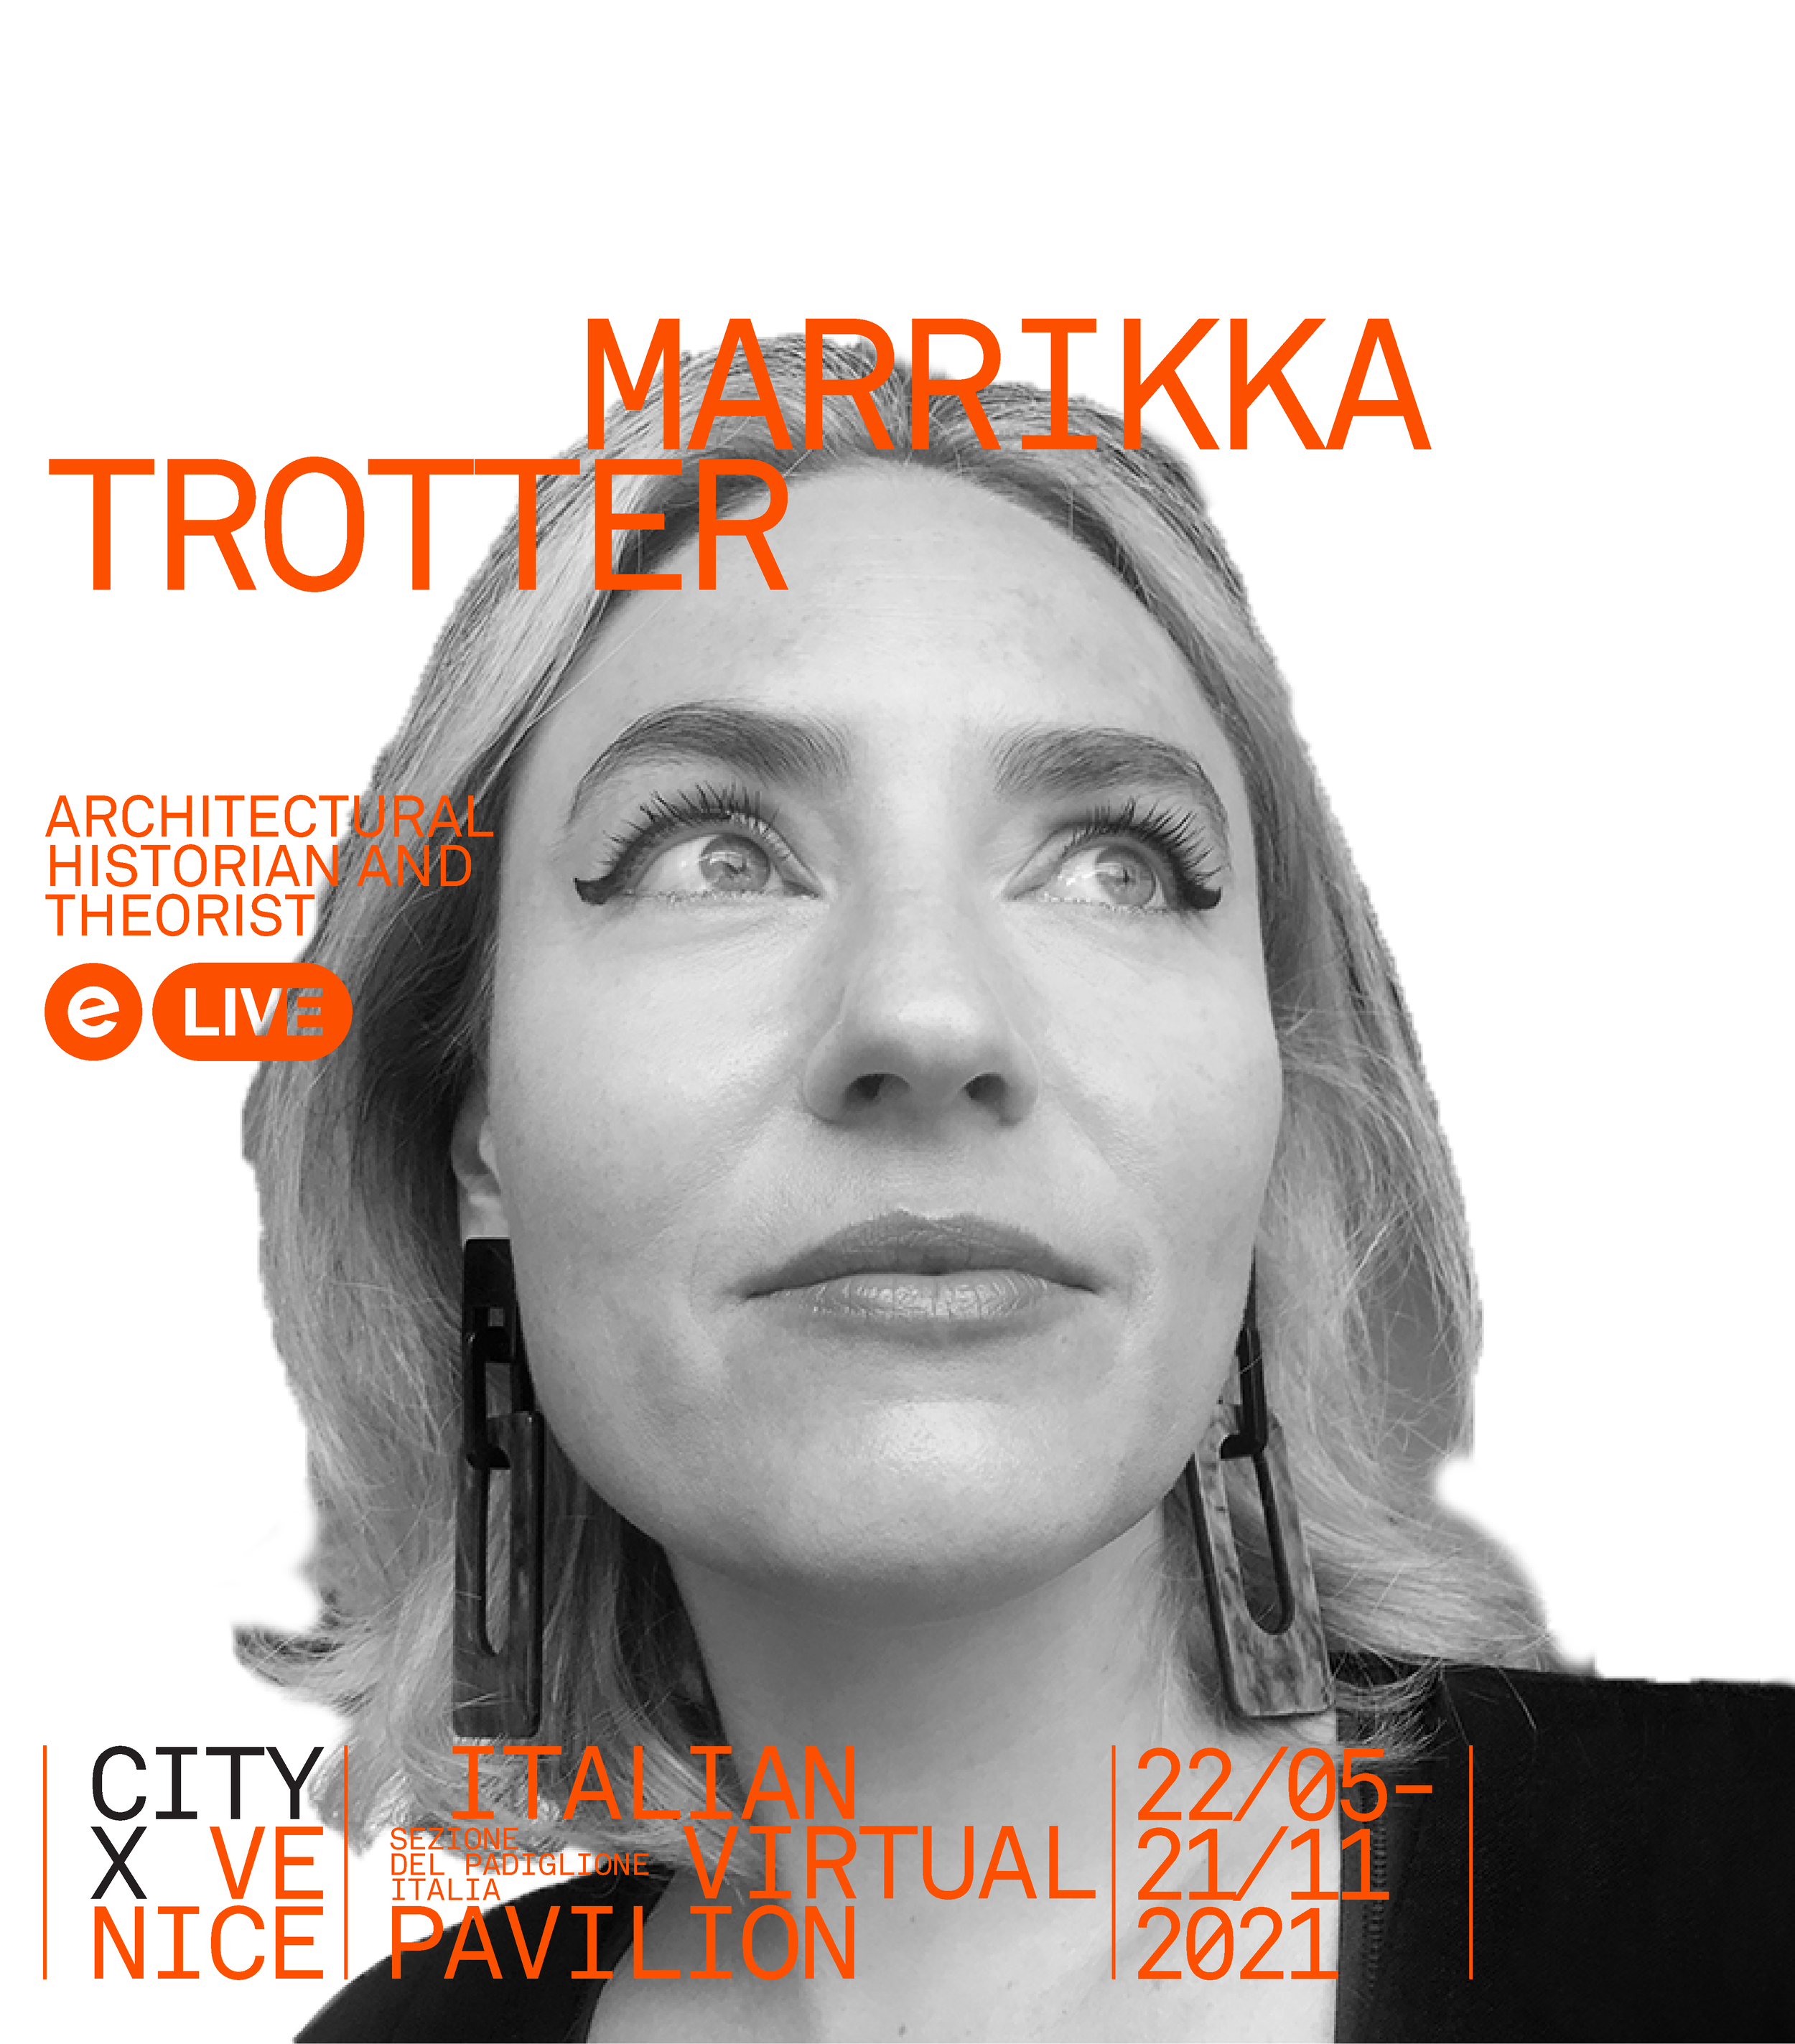 CITYX China - MARRIKKA TROTTER-02.png